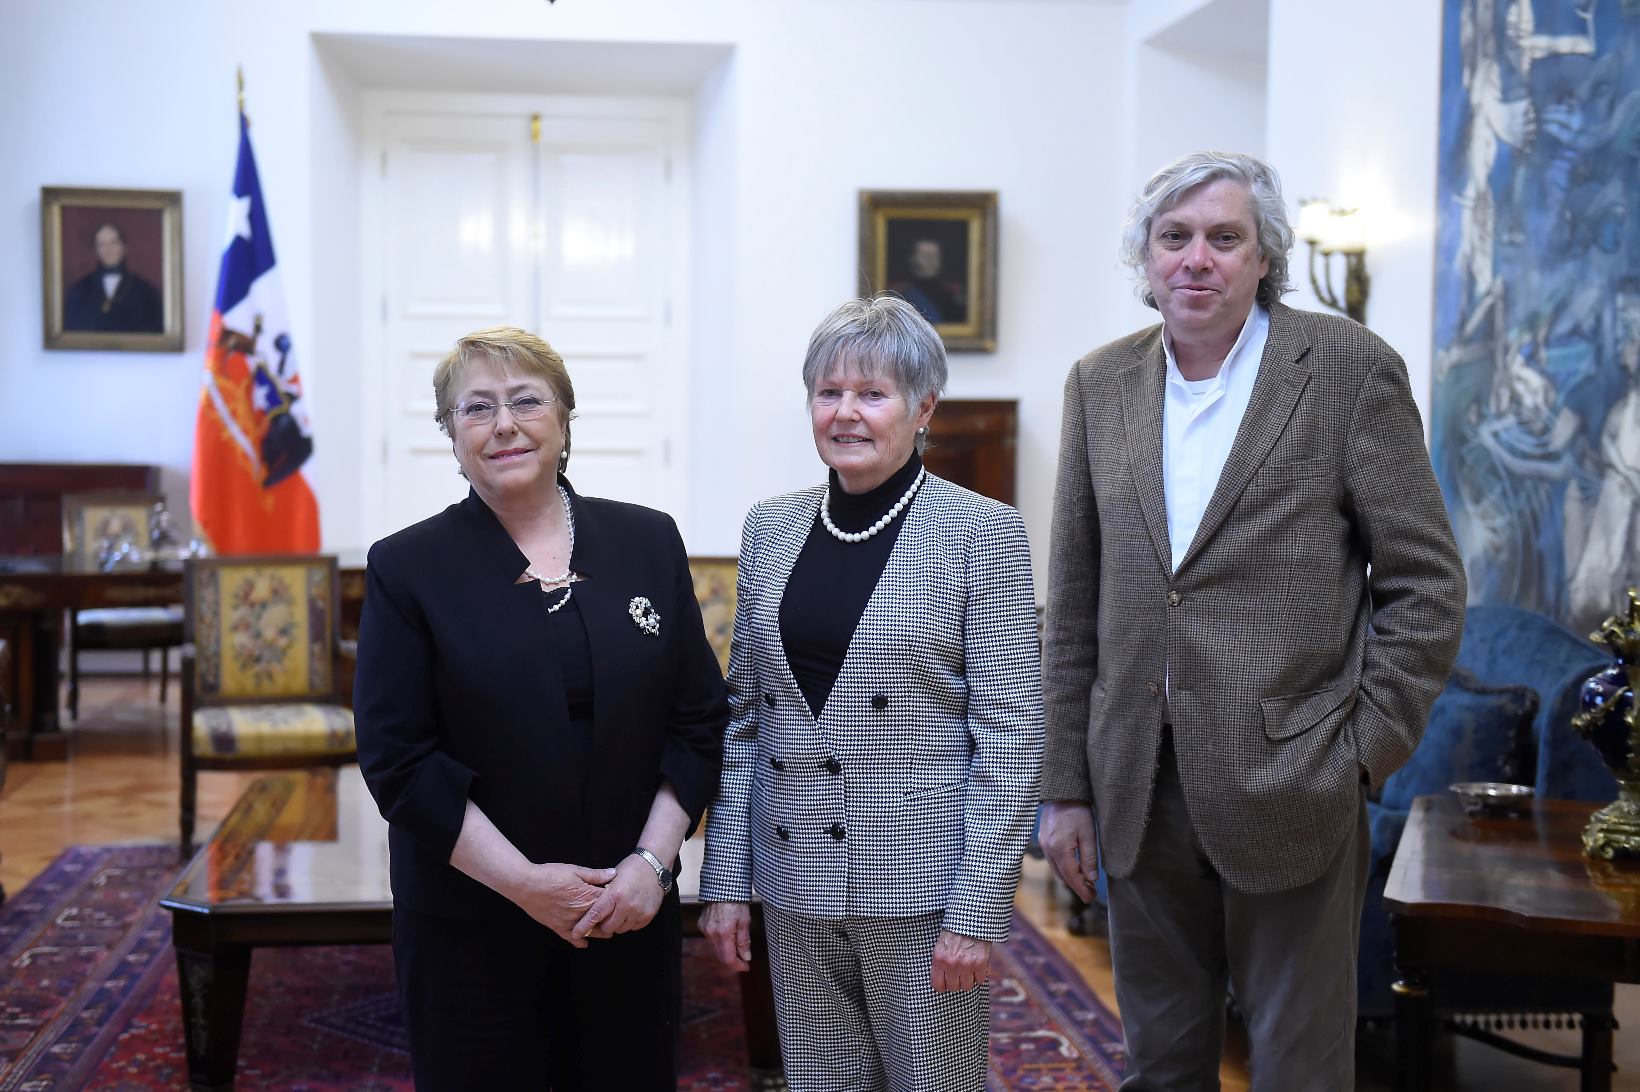 H.E. Michelle Bachelet, The President of Chile, receives Mme France Marquet, Trustee, Madanjeet Singh foundation and Mr Francisco  Javier Estevez Valencia, laureate 2014 of the UNESCO Madanjeet Singh prize for the promotion of tolerance and non-violence